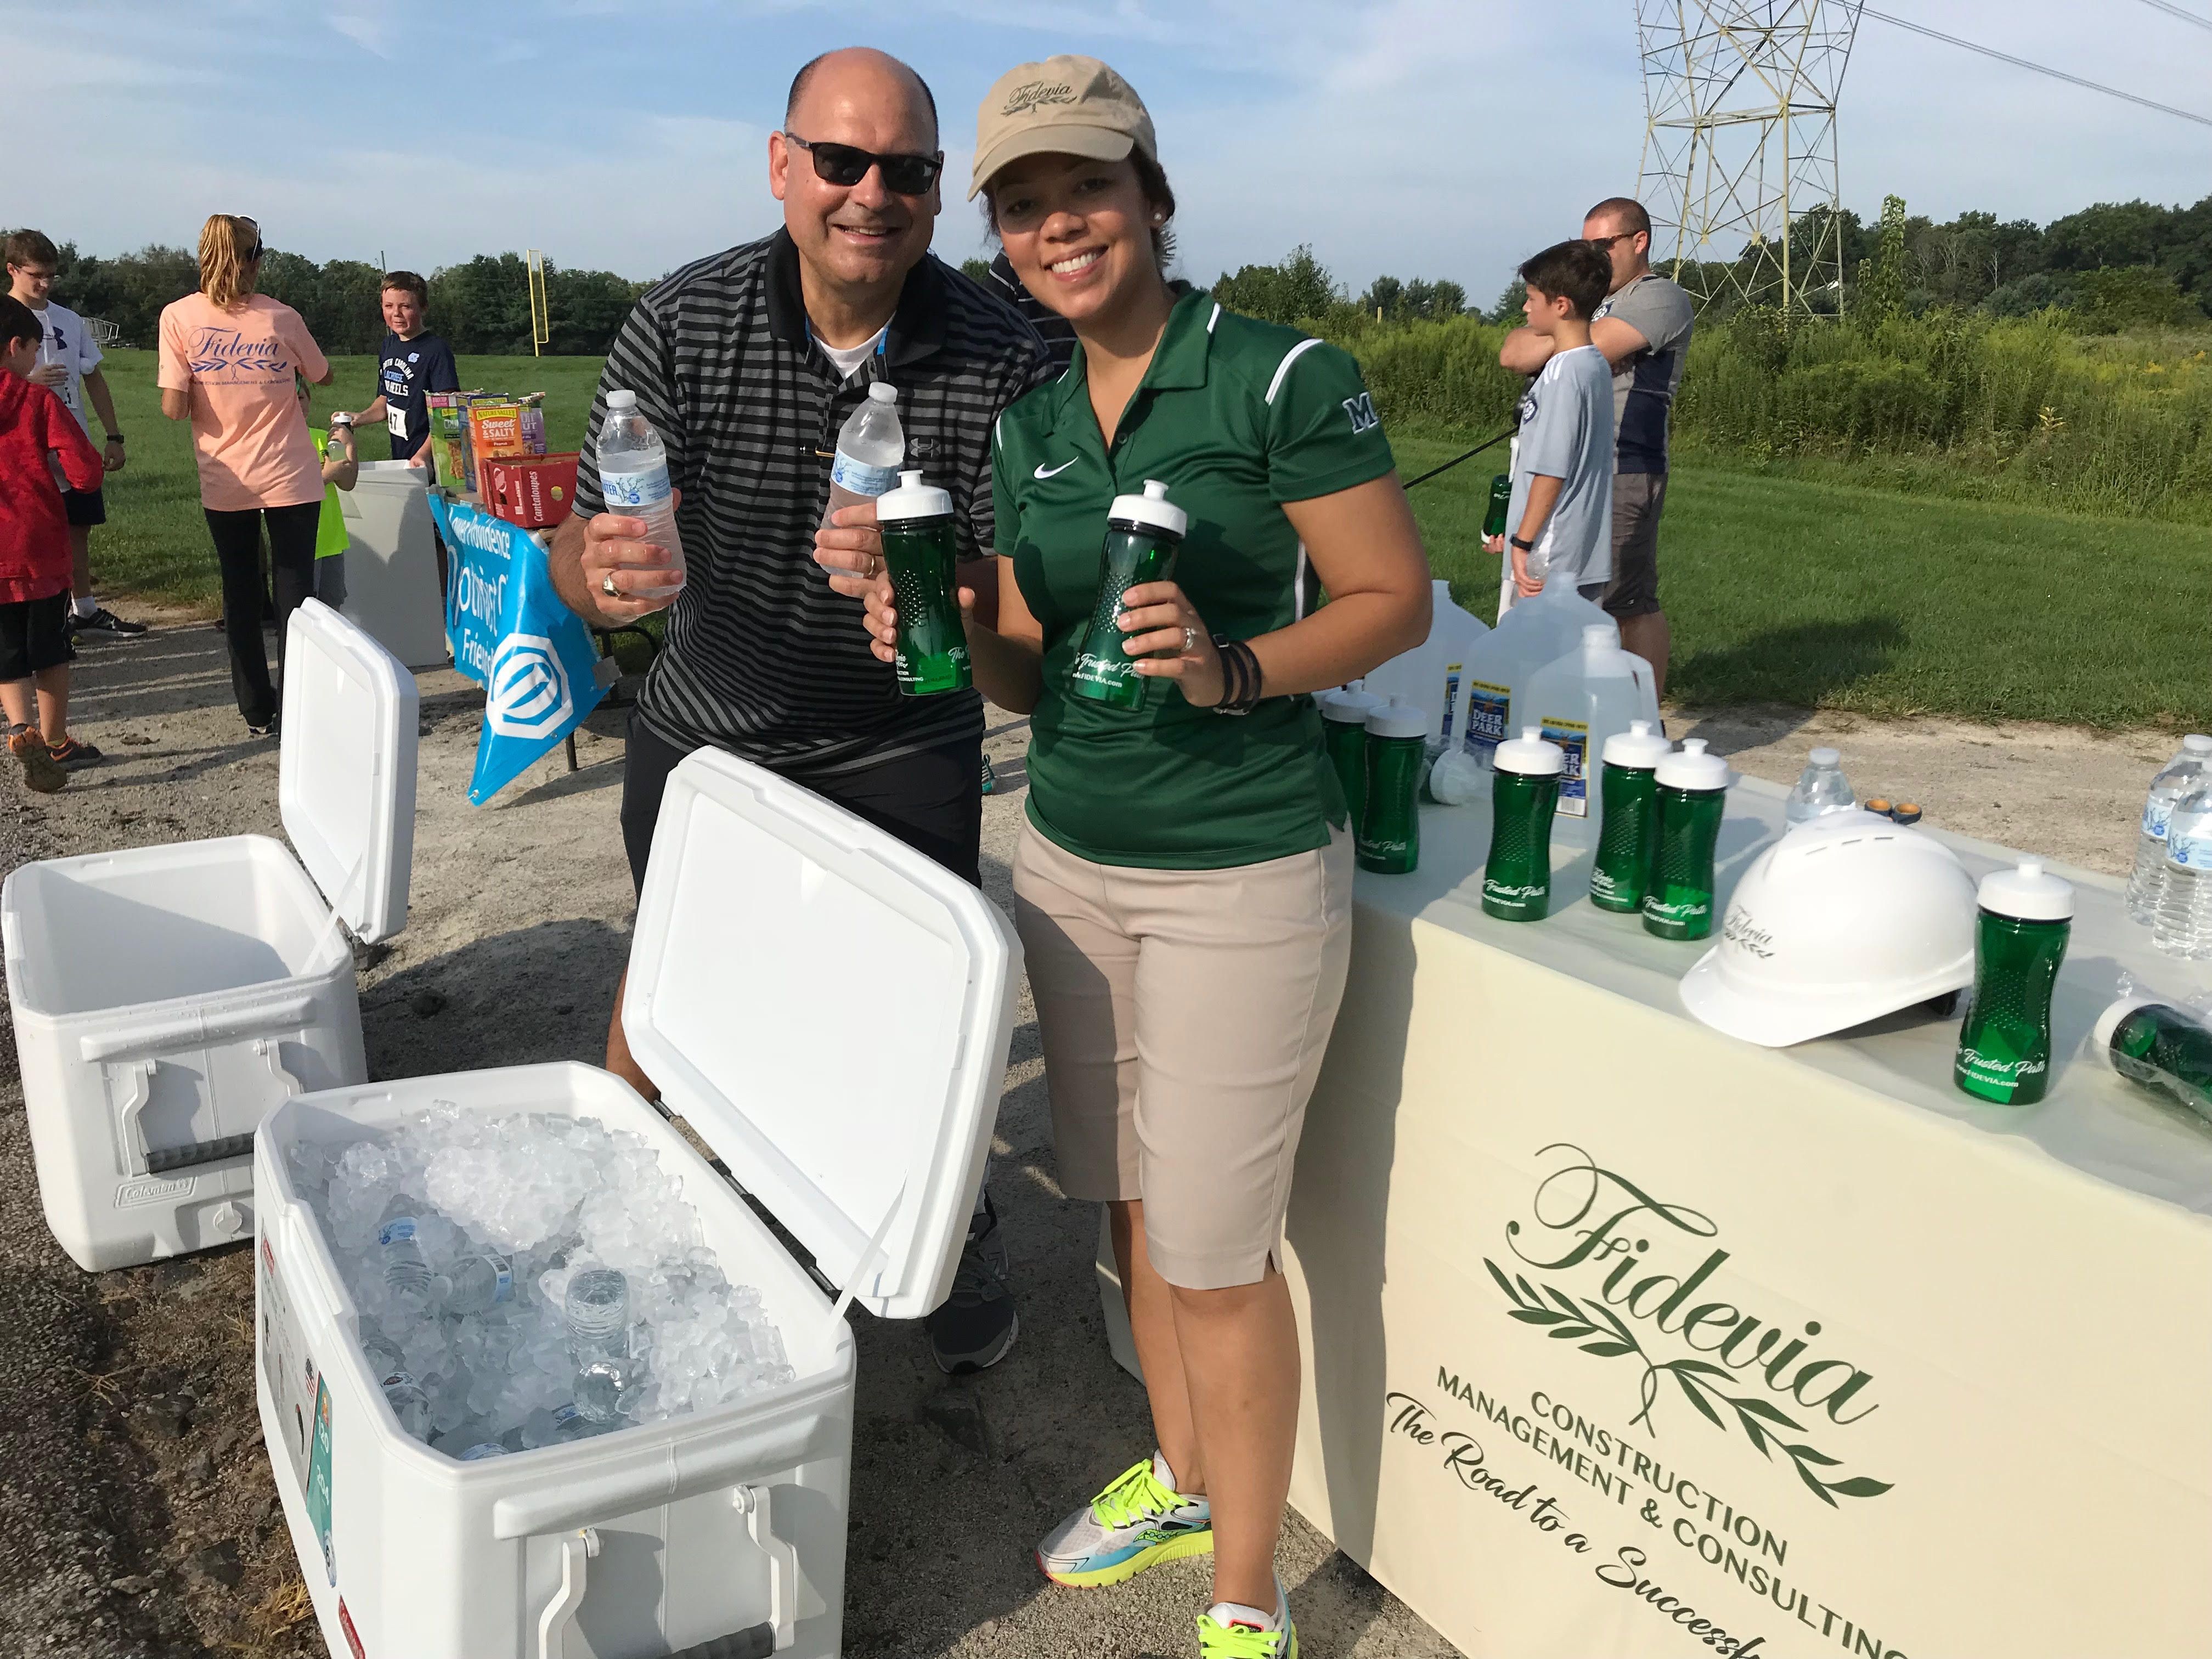 Fidevia Hands Out Water to Runners at 5K